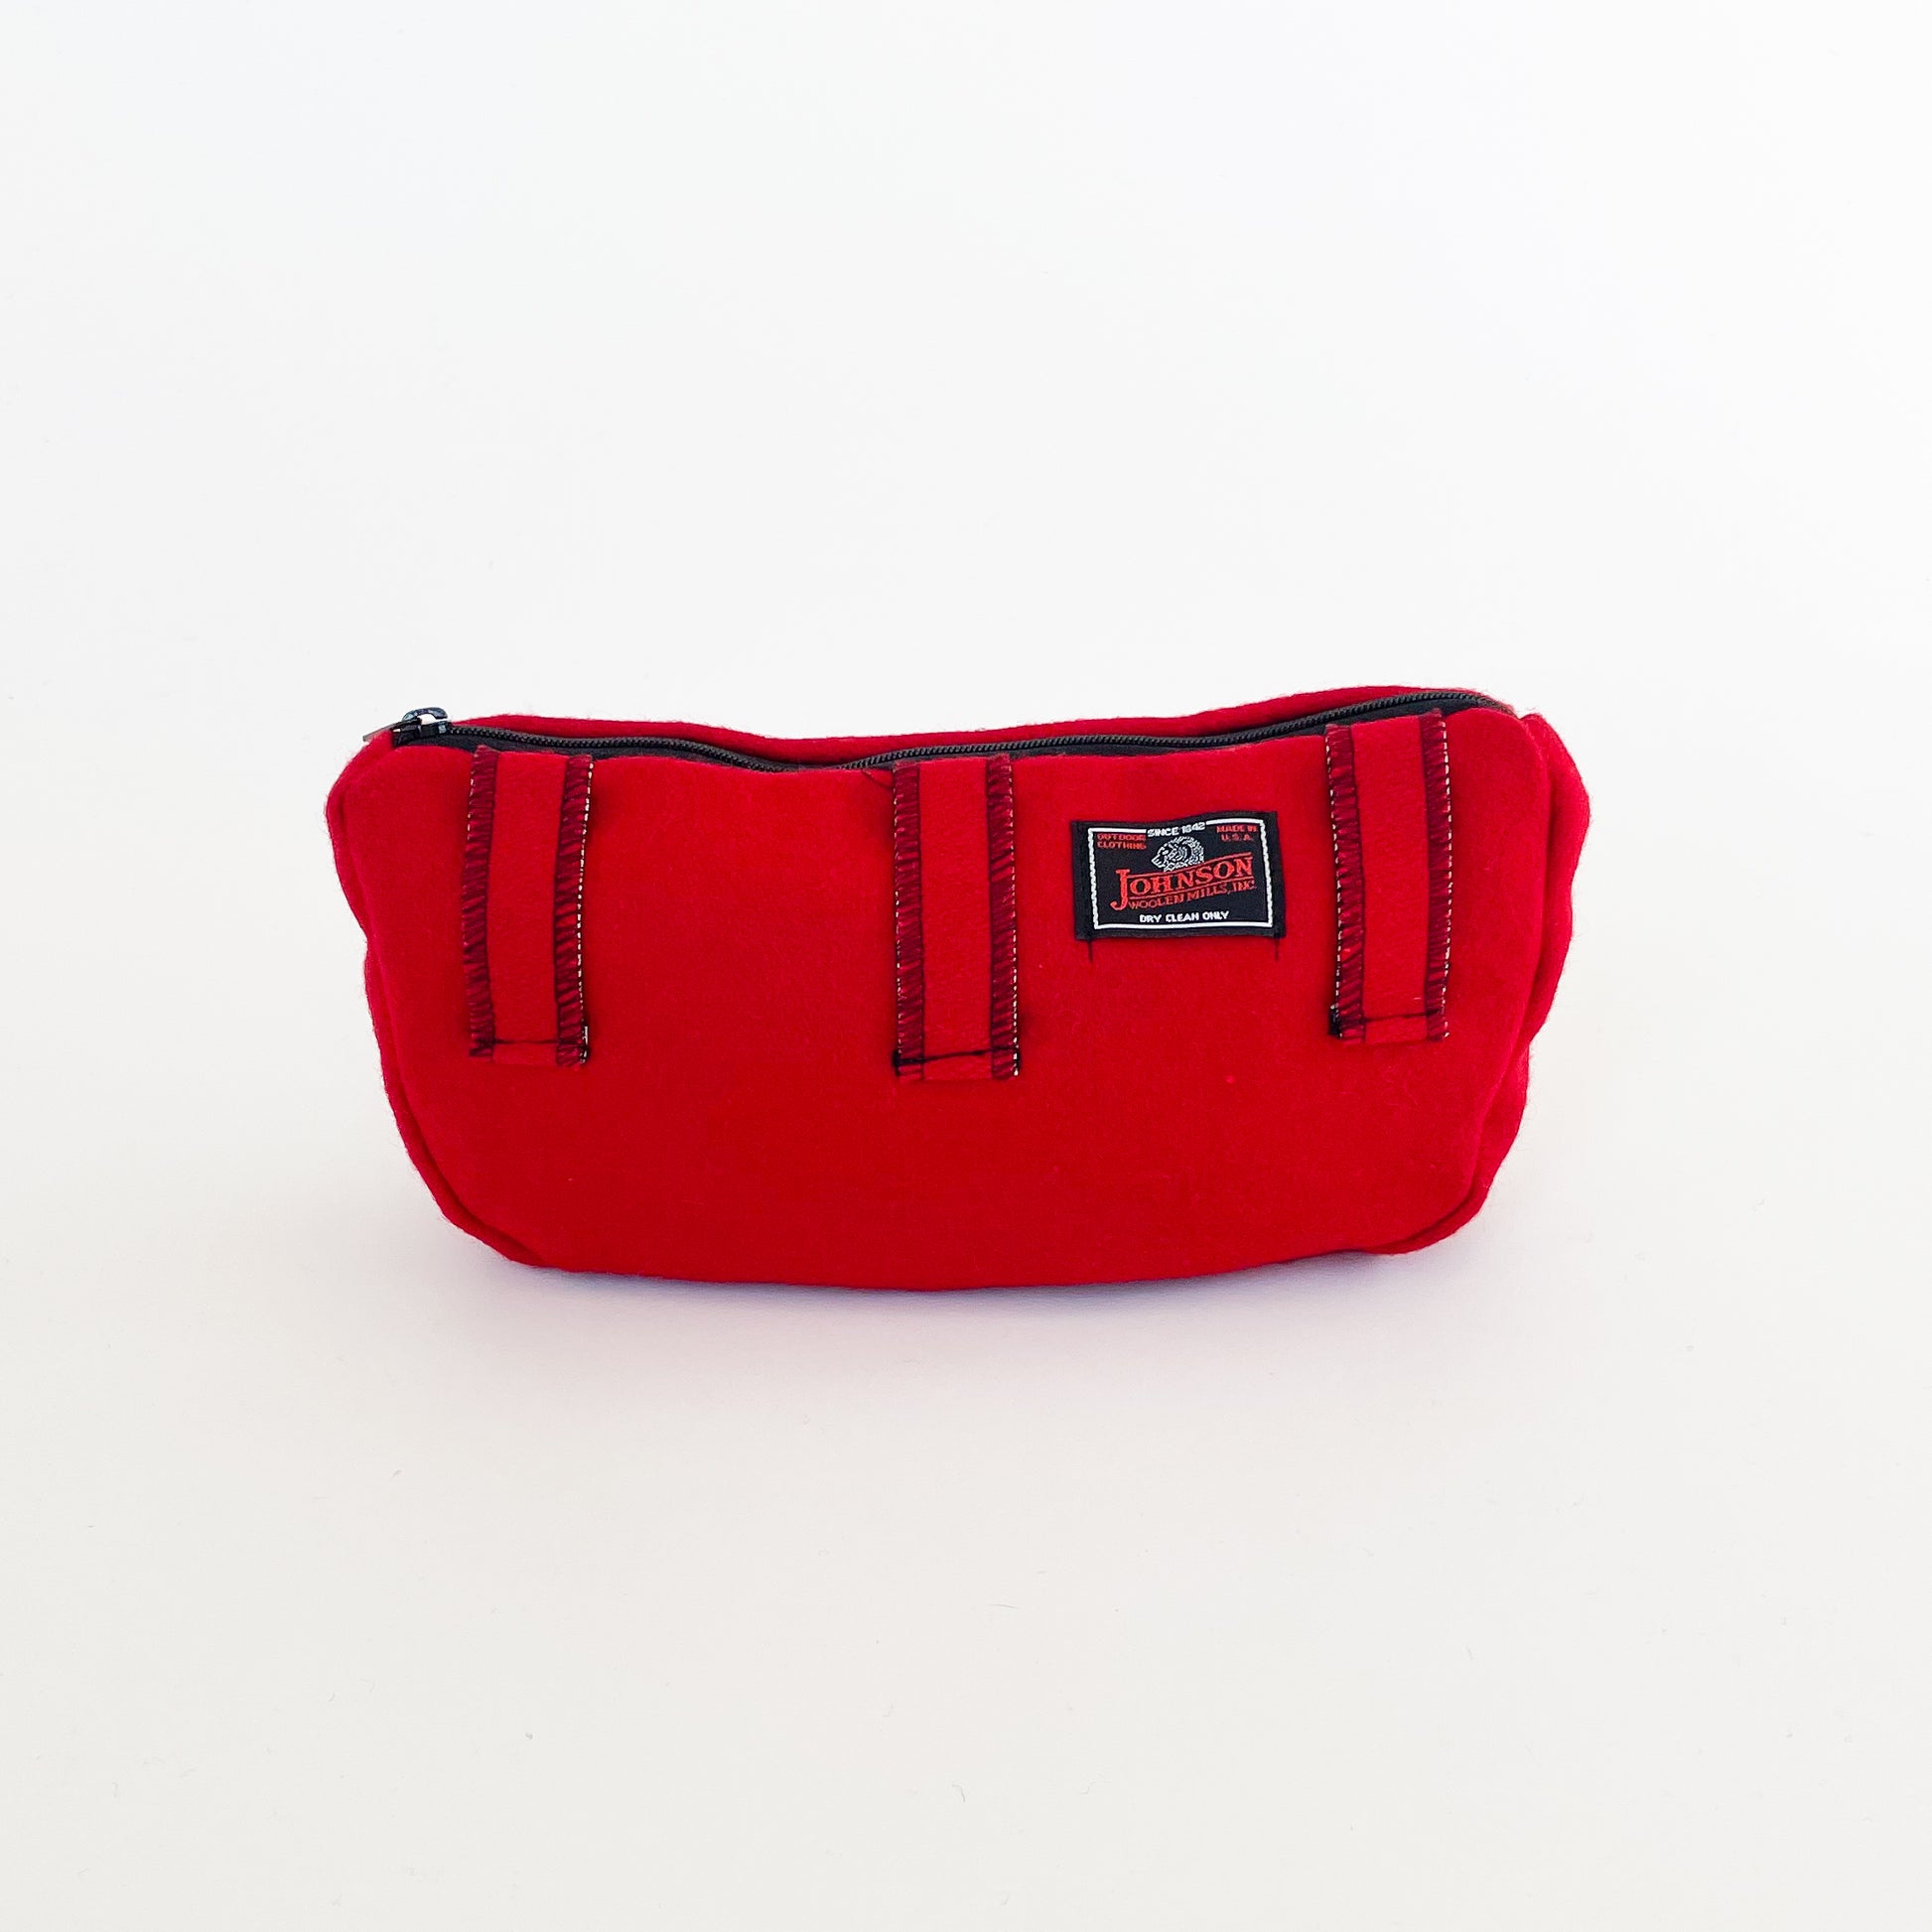 Wool sidewinder - bag with zipped closure and belt loops for wearing on your waist. Shown in scarlett. Back view